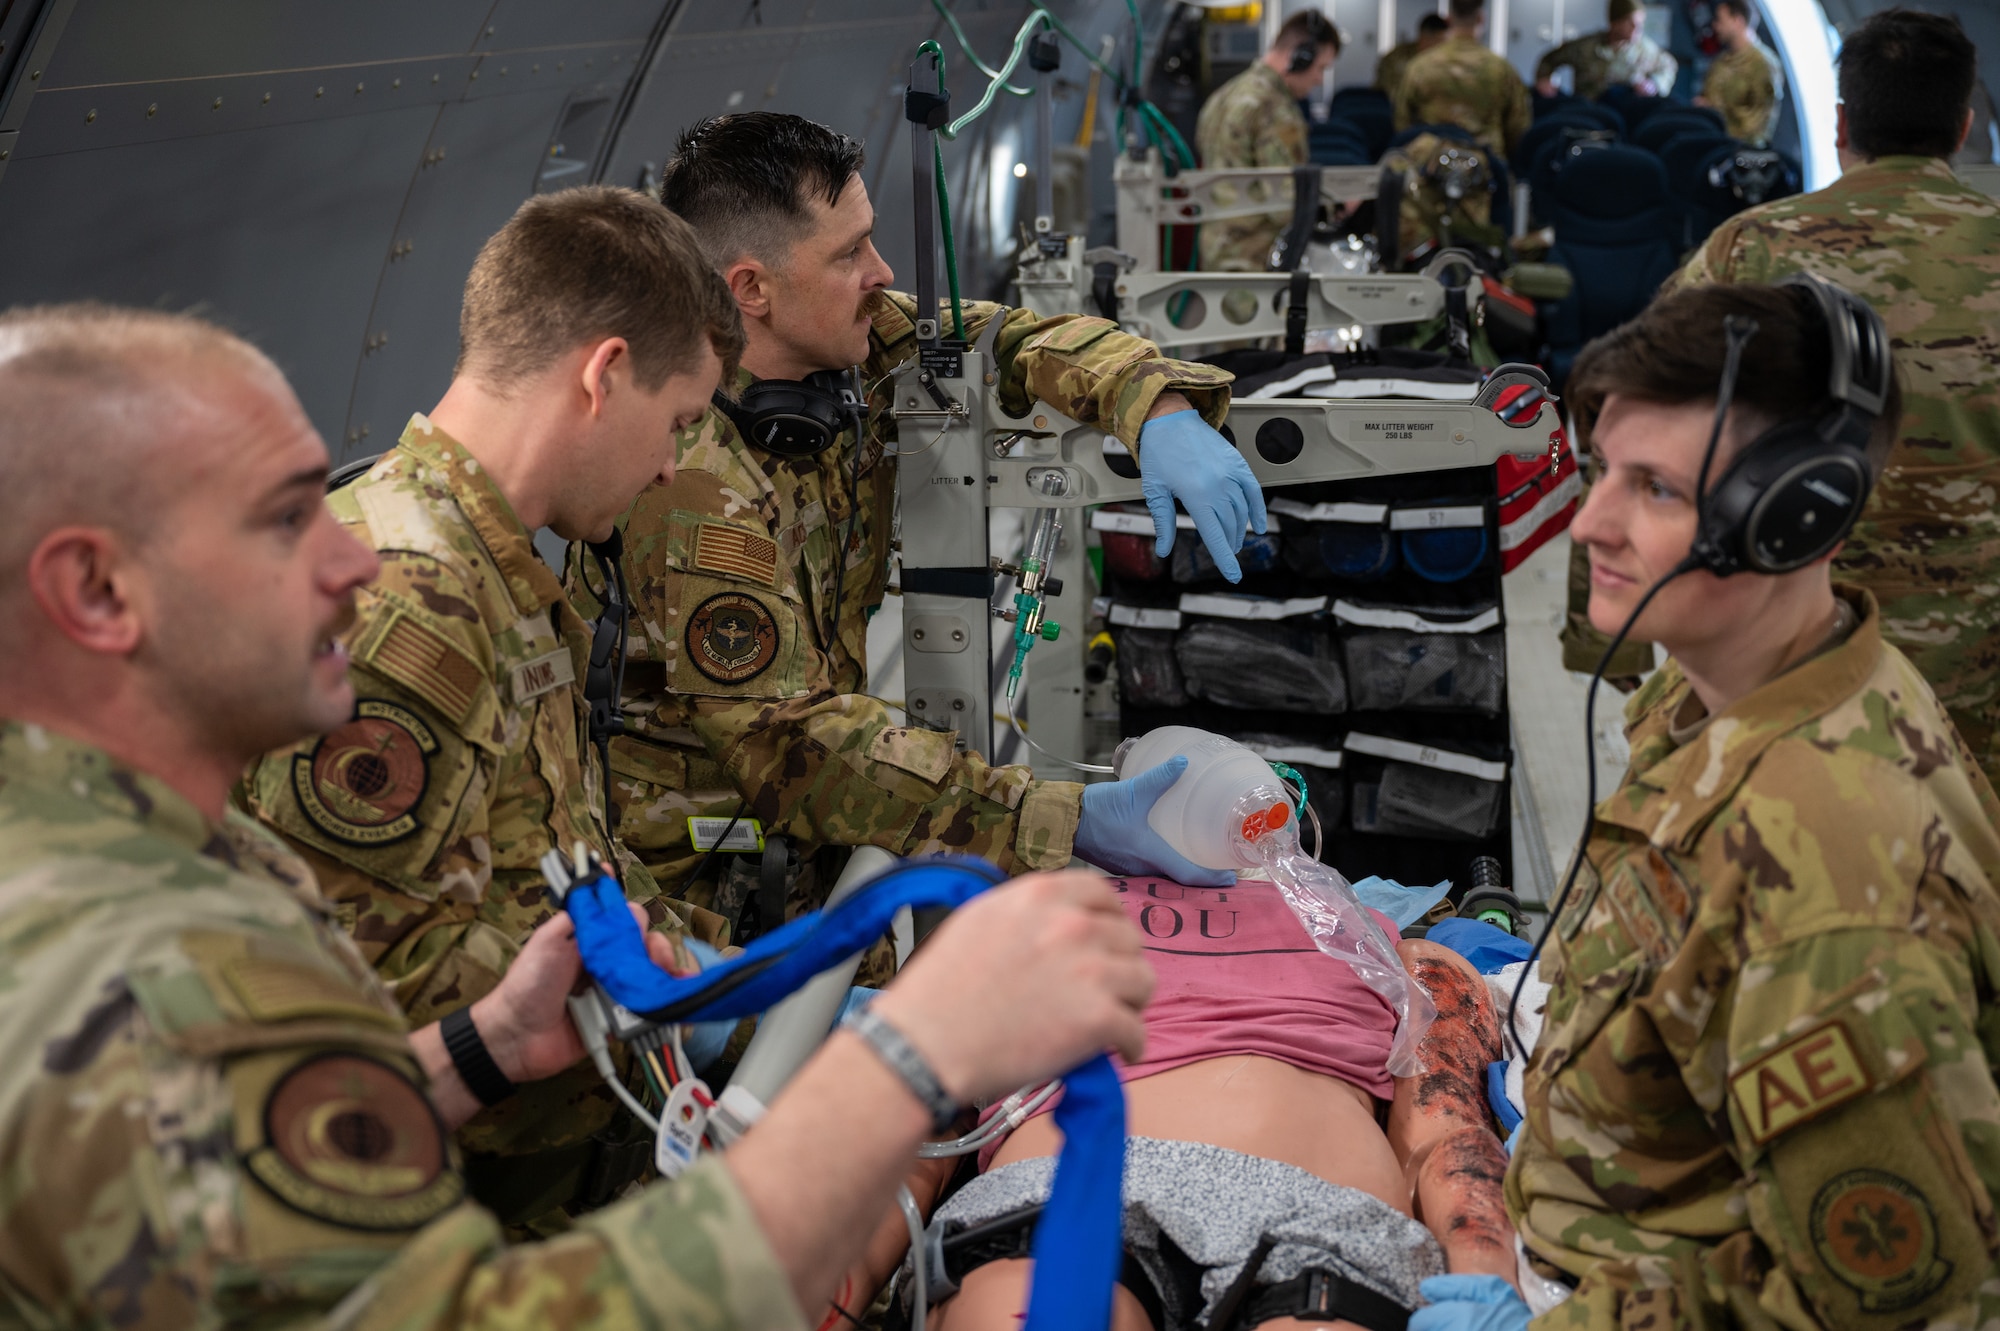 Members from the 375th Aeromedical Evacuation Squadron practice care on a simulated patient during Exercise Lethal Pride March 29, 2023, at McConnell Air Force Base, Kansas. Lethal Pride was a five-day exercise testing the 22nd Air Refueling Wing’s ability to launch, communicate with and recover aircraft in a contested environment with degraded communications. (U.S. Air Force photo by Senior Airman Zachary Willis)